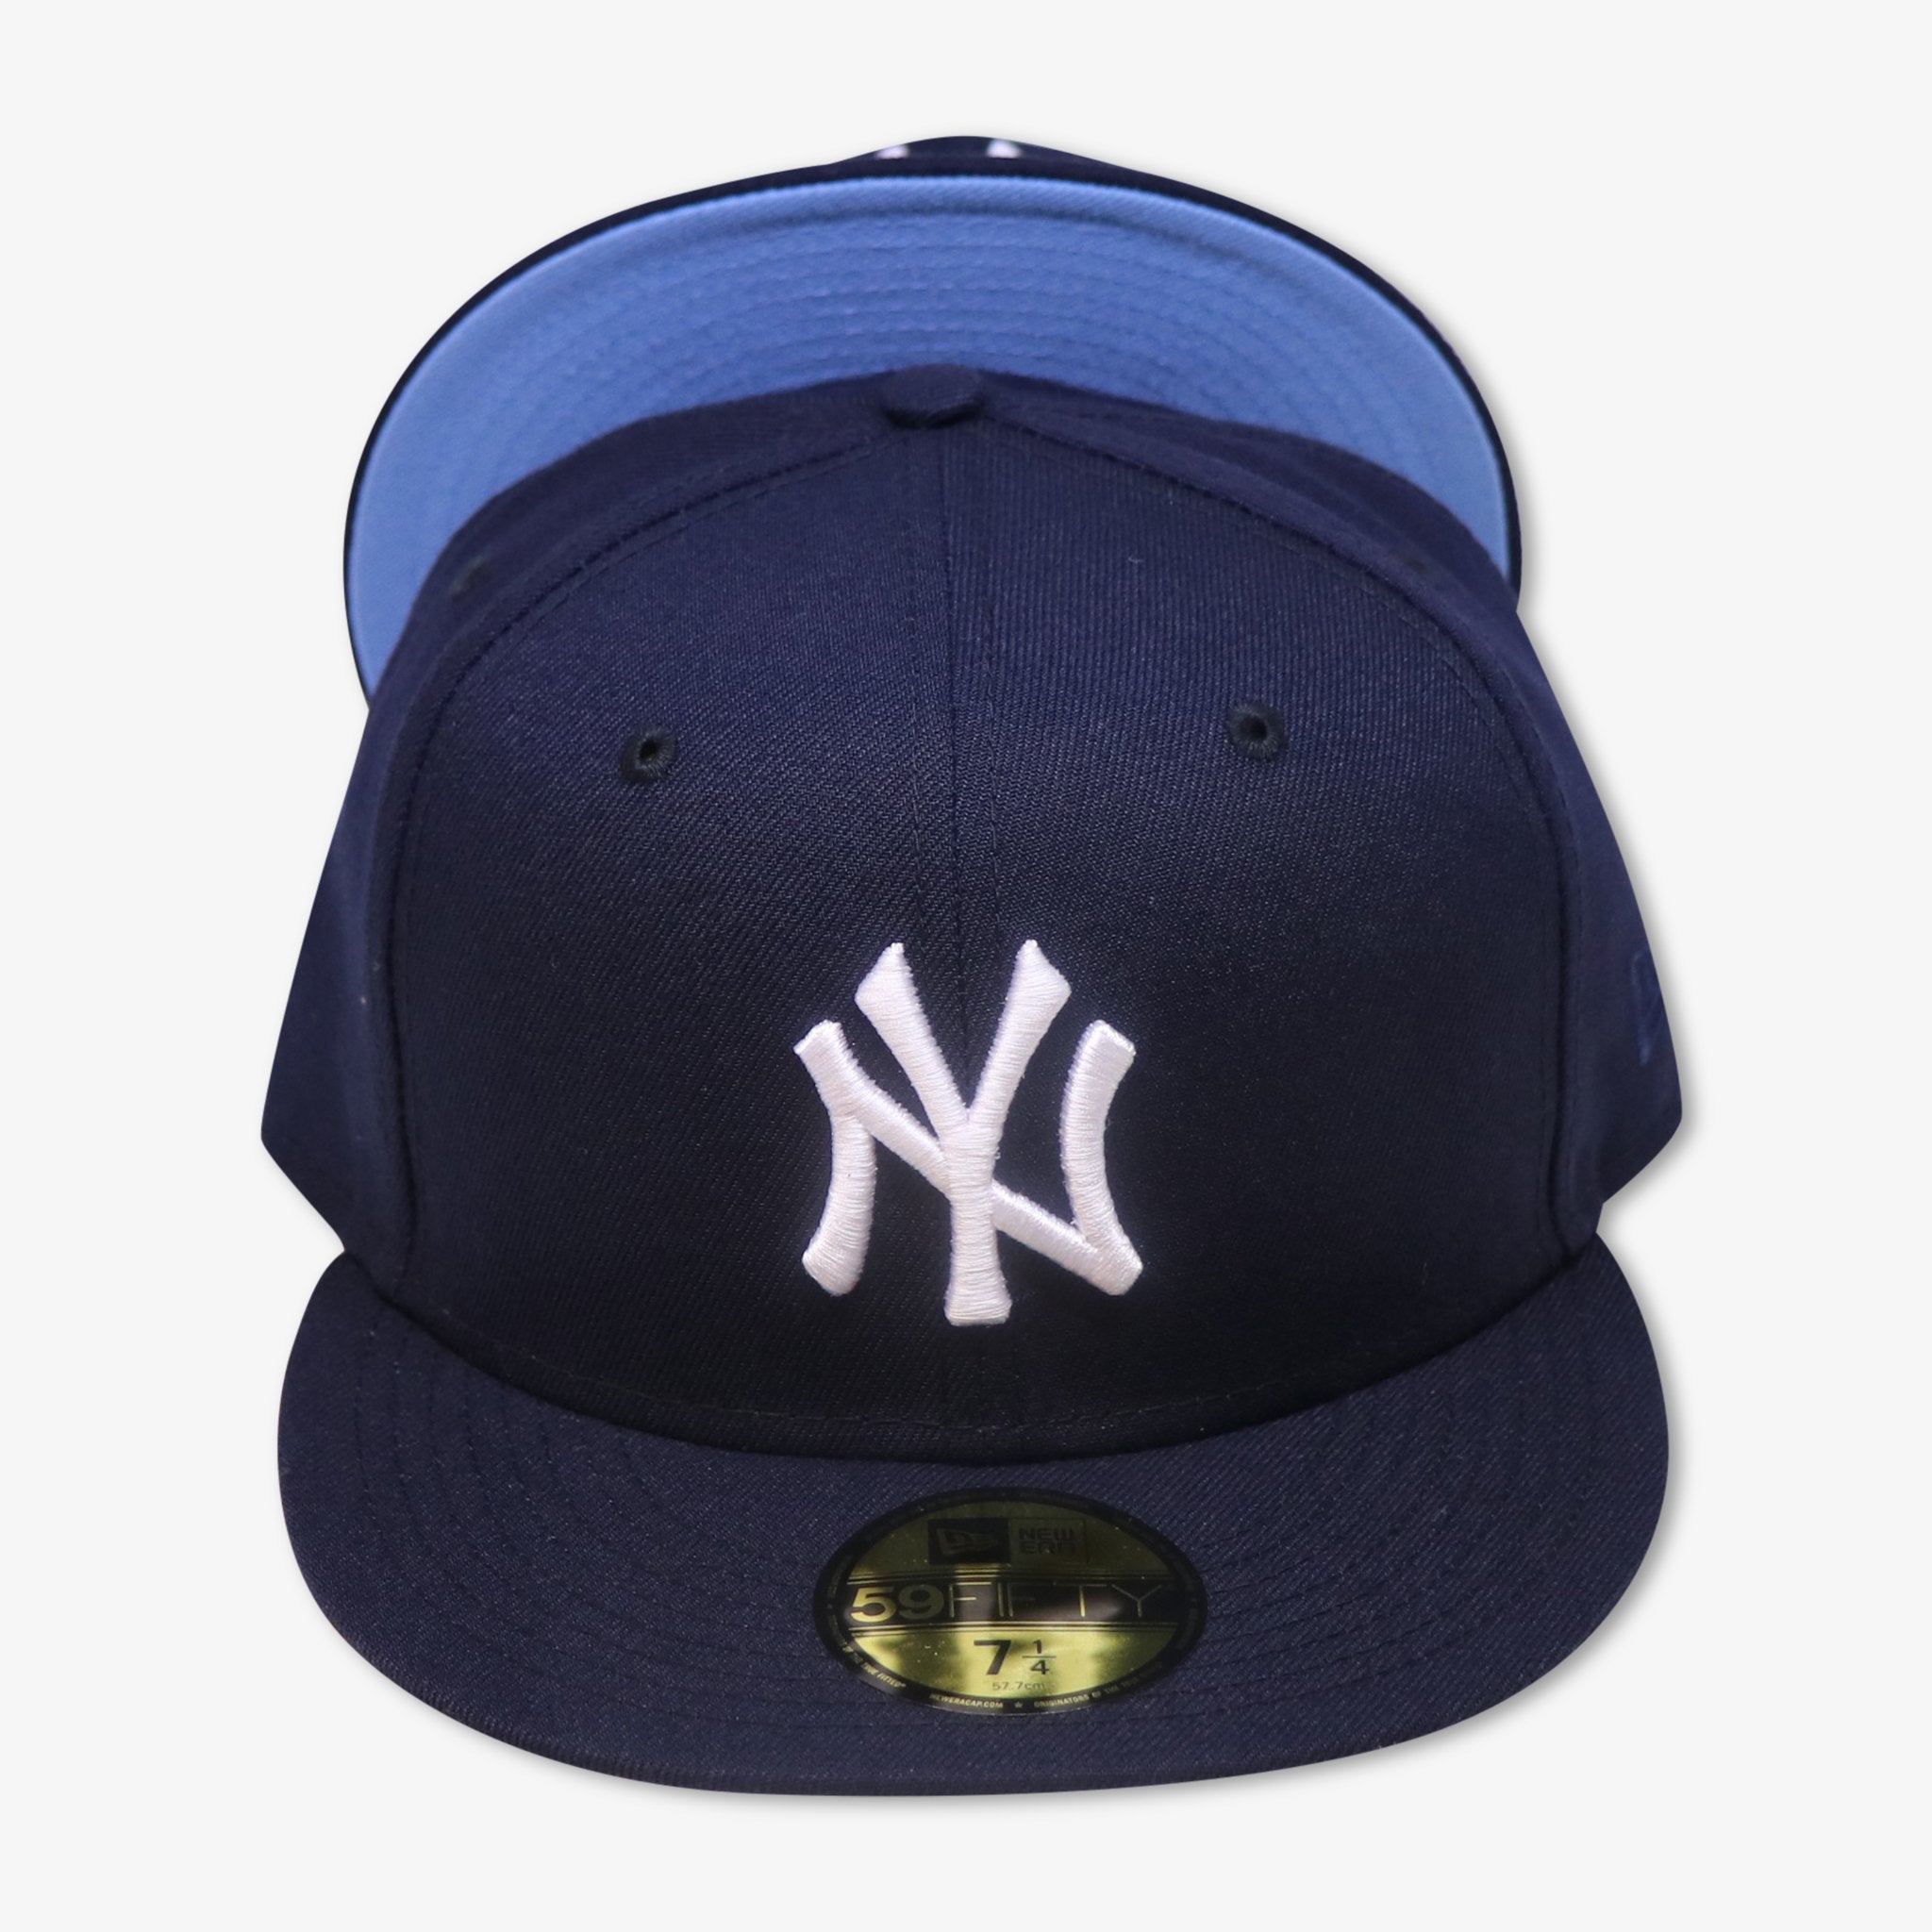 NEW YORK YANKEES (NAVY) "SKY BLUE  UNDERVISOR" NEWERA 59FIFTY FITTED